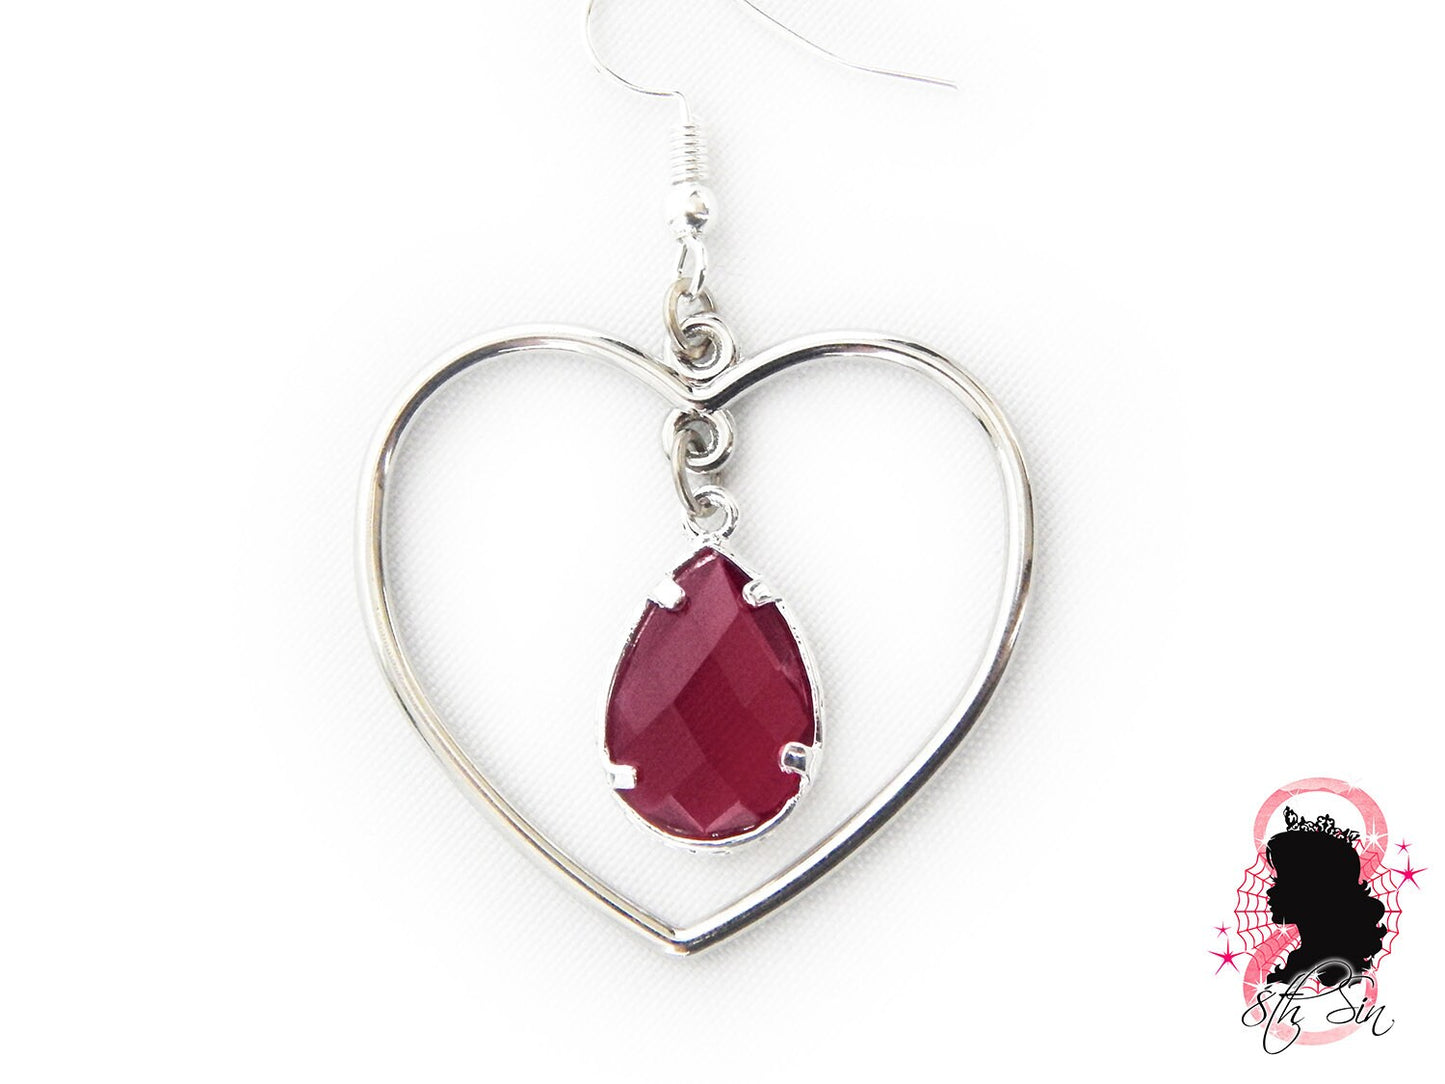 Antique Silver and Amethyst Heart Earrings